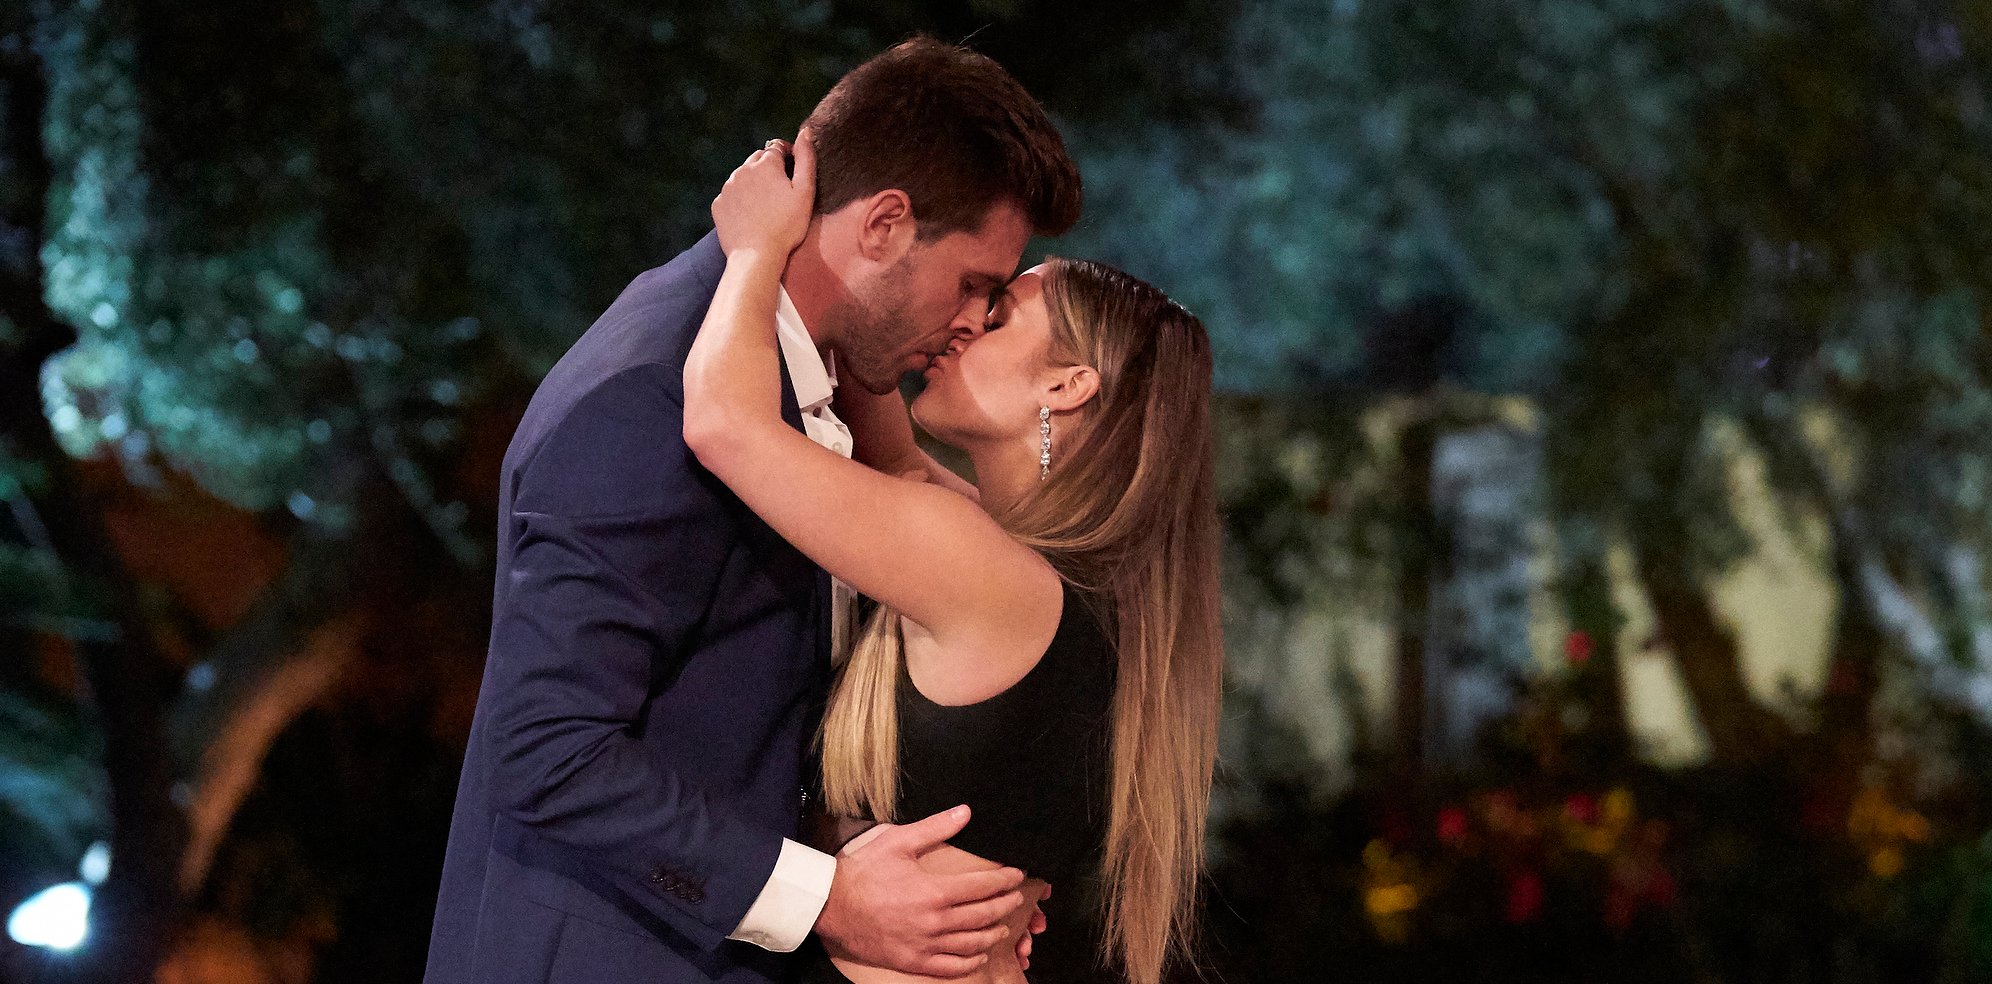 'The Bachelorette' stars Zach and Rachel share a kiss in a production still from this season.